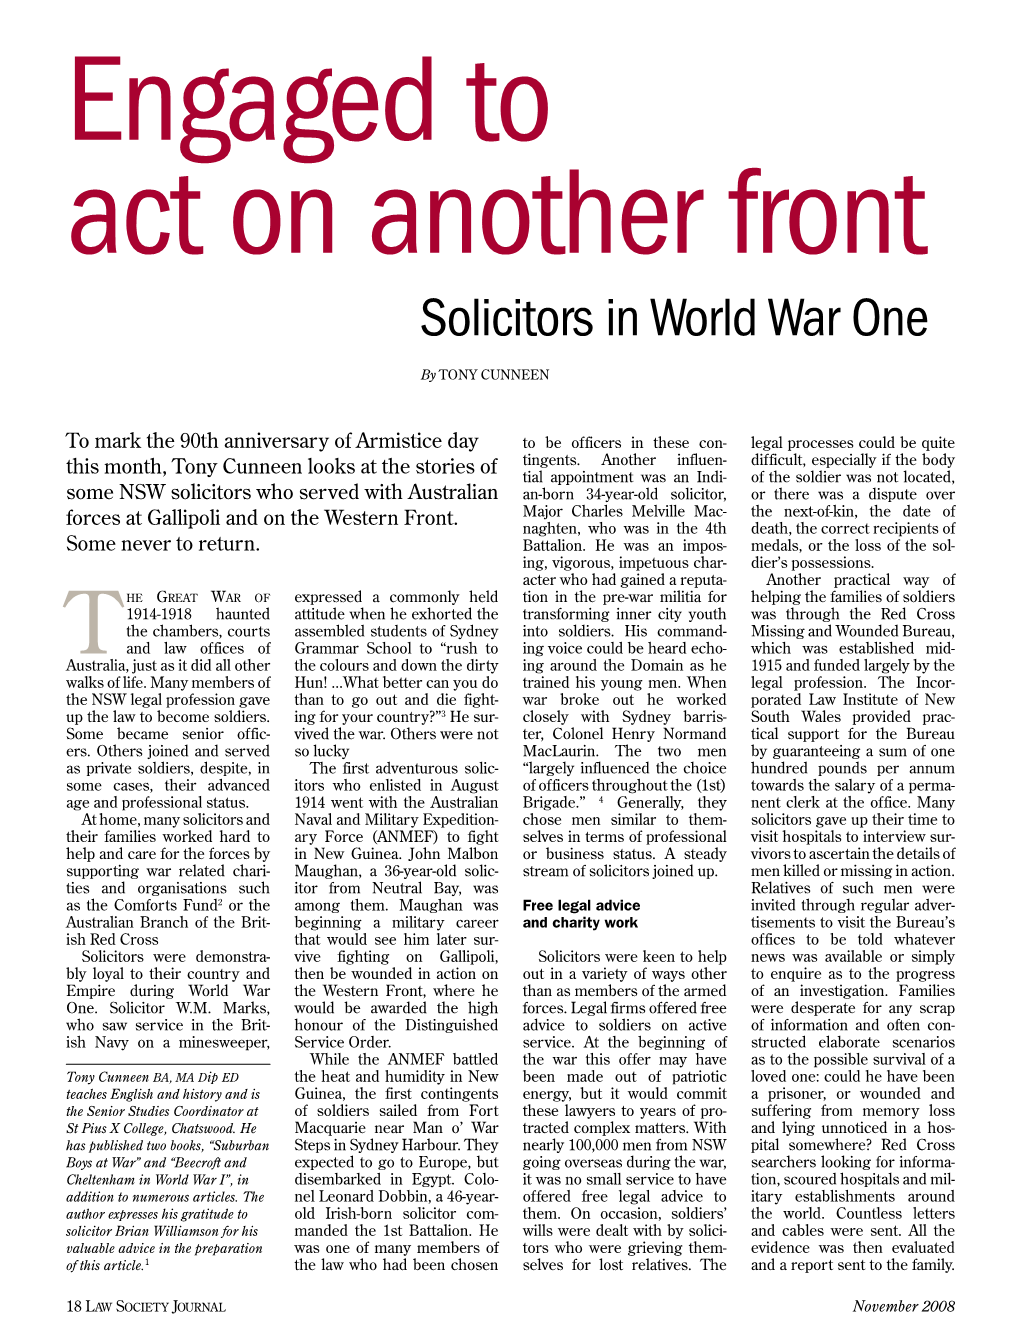 Solicitors in World War One